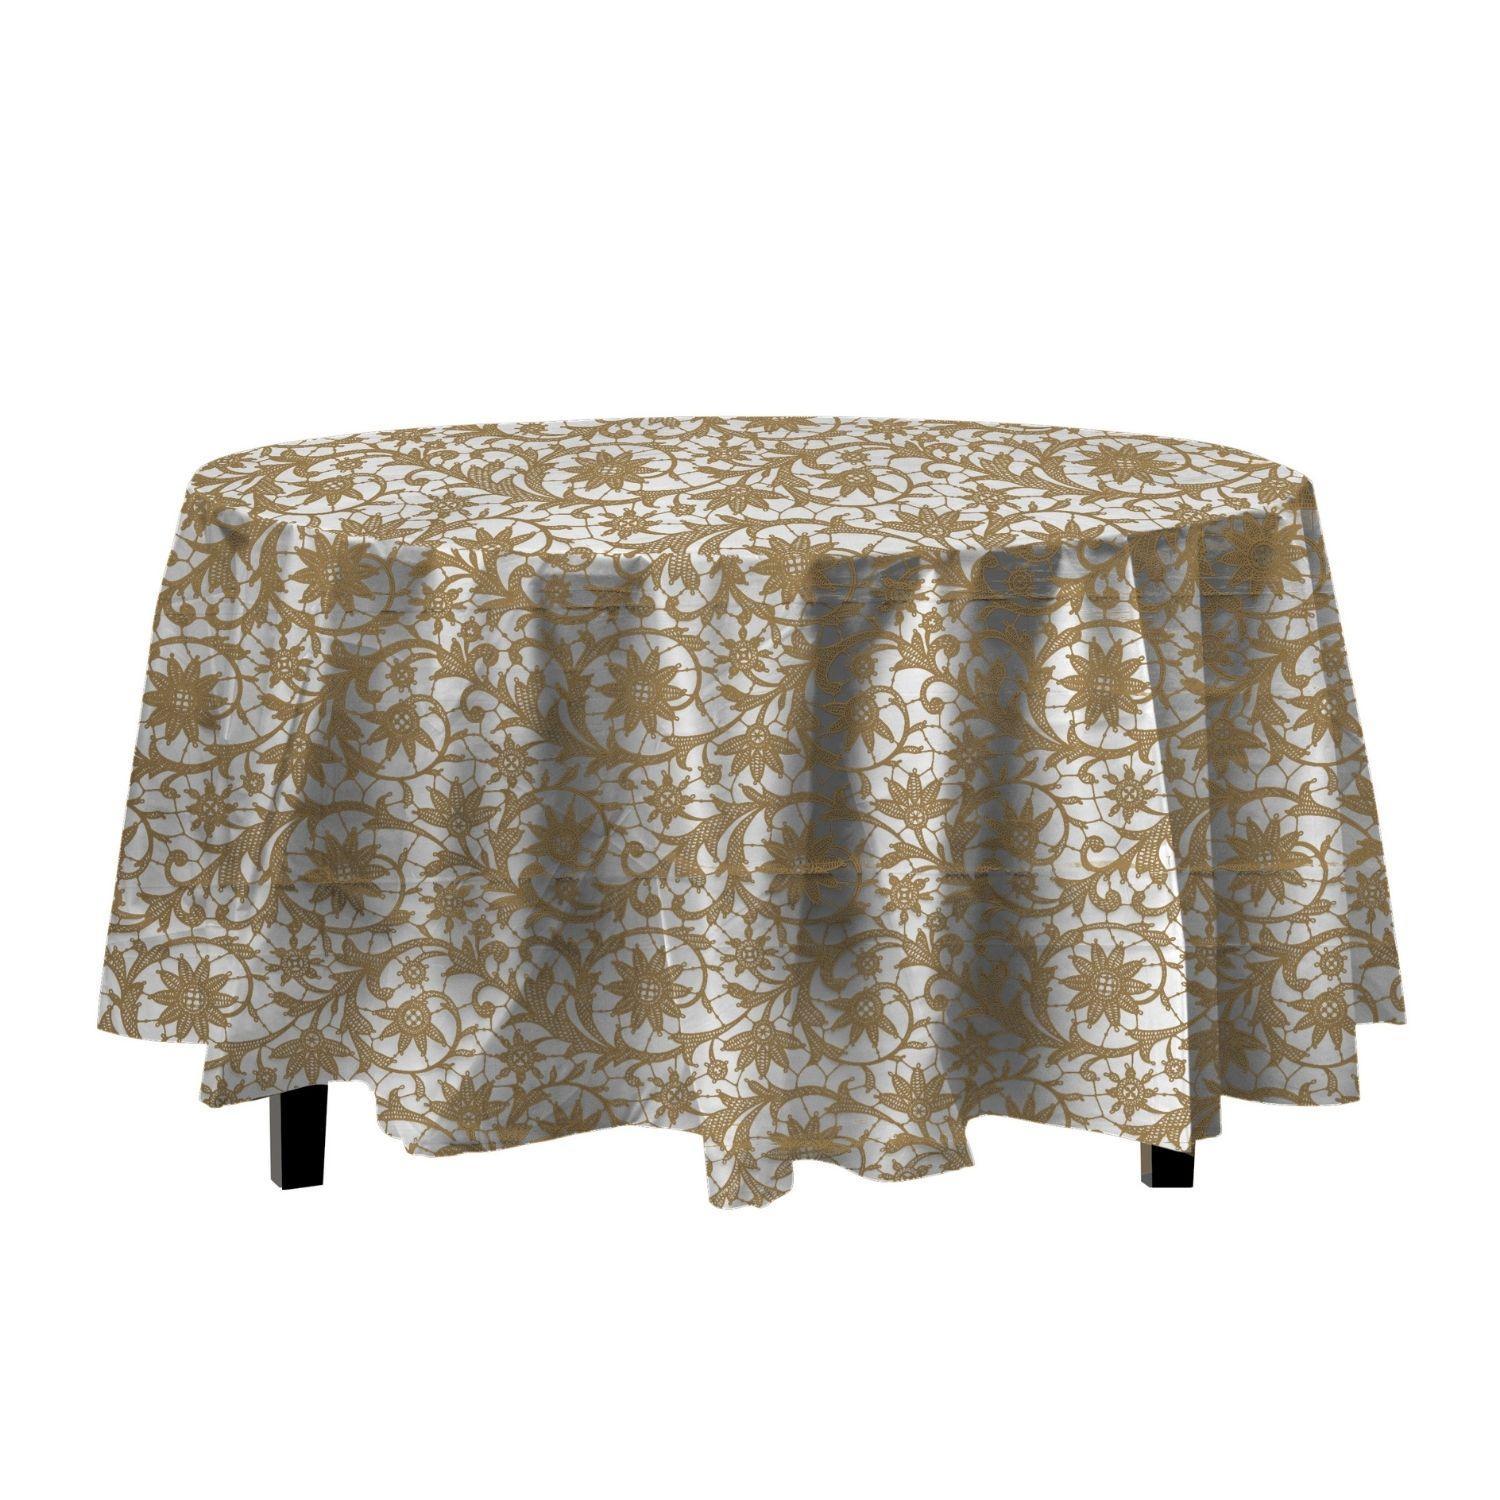 84in. Round Printed Plastic Table cover Gold Lace - 48 ct.